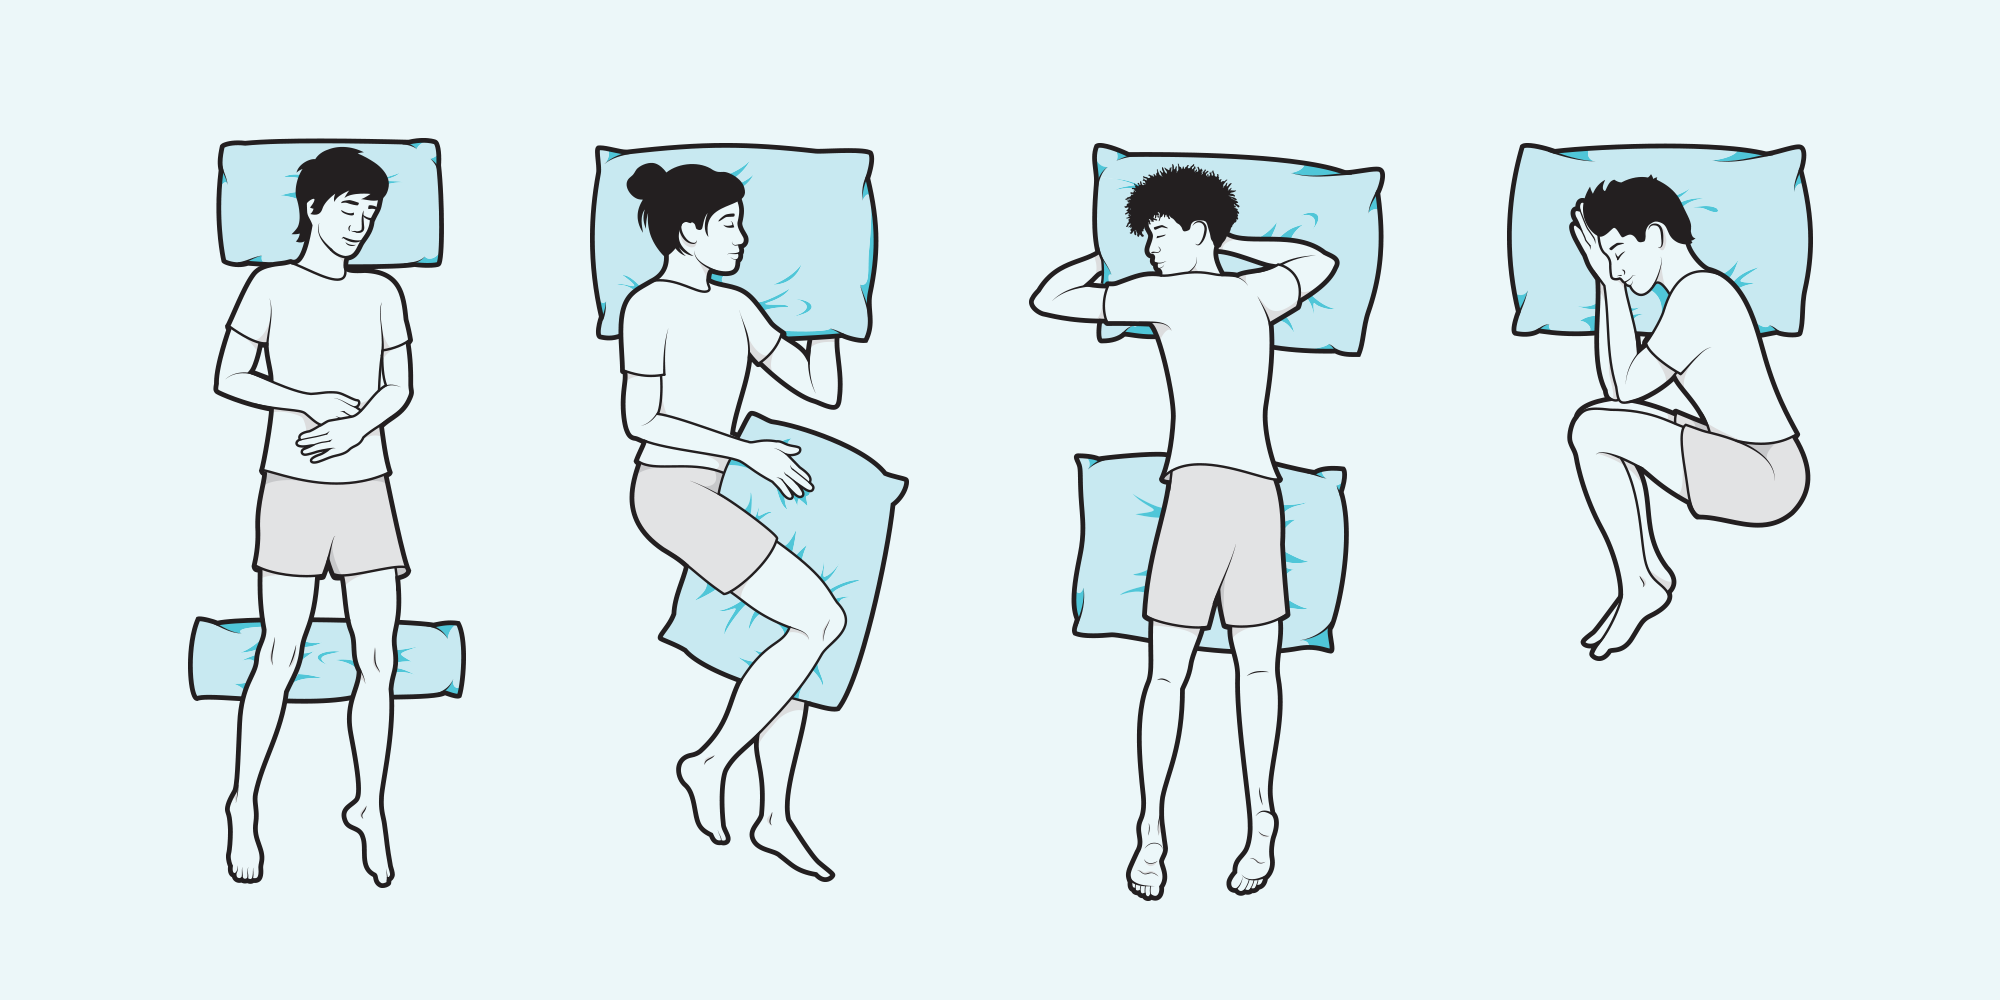 Sleeping Position For Lower Back Pain - Back Support Systems